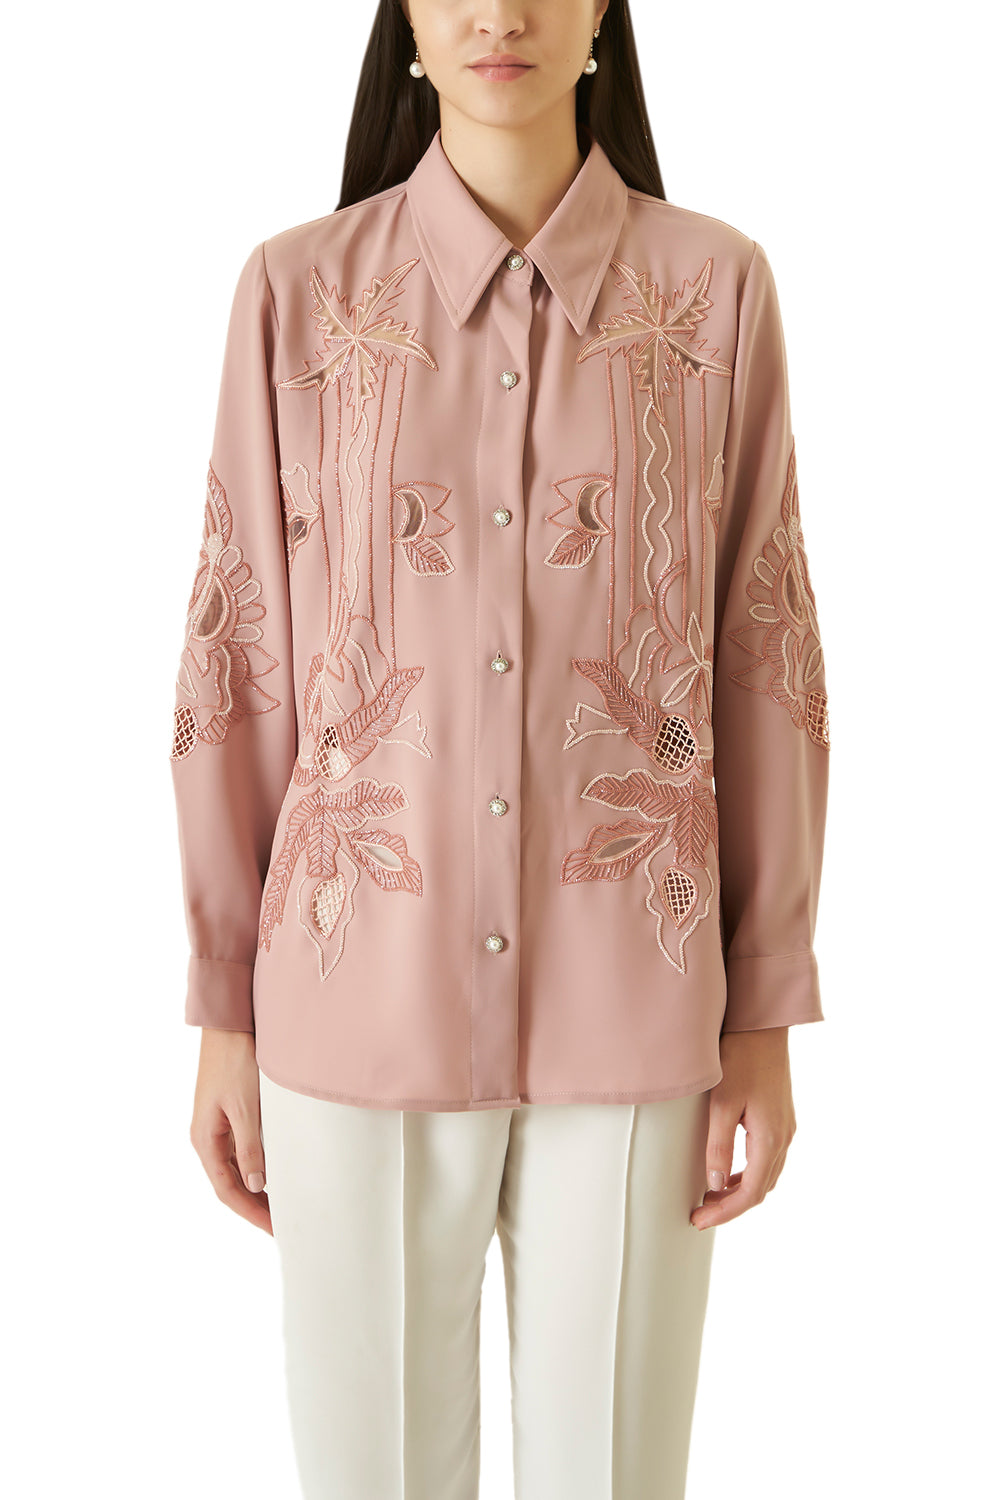 Pale Pink Cutwork Shirt with Beads